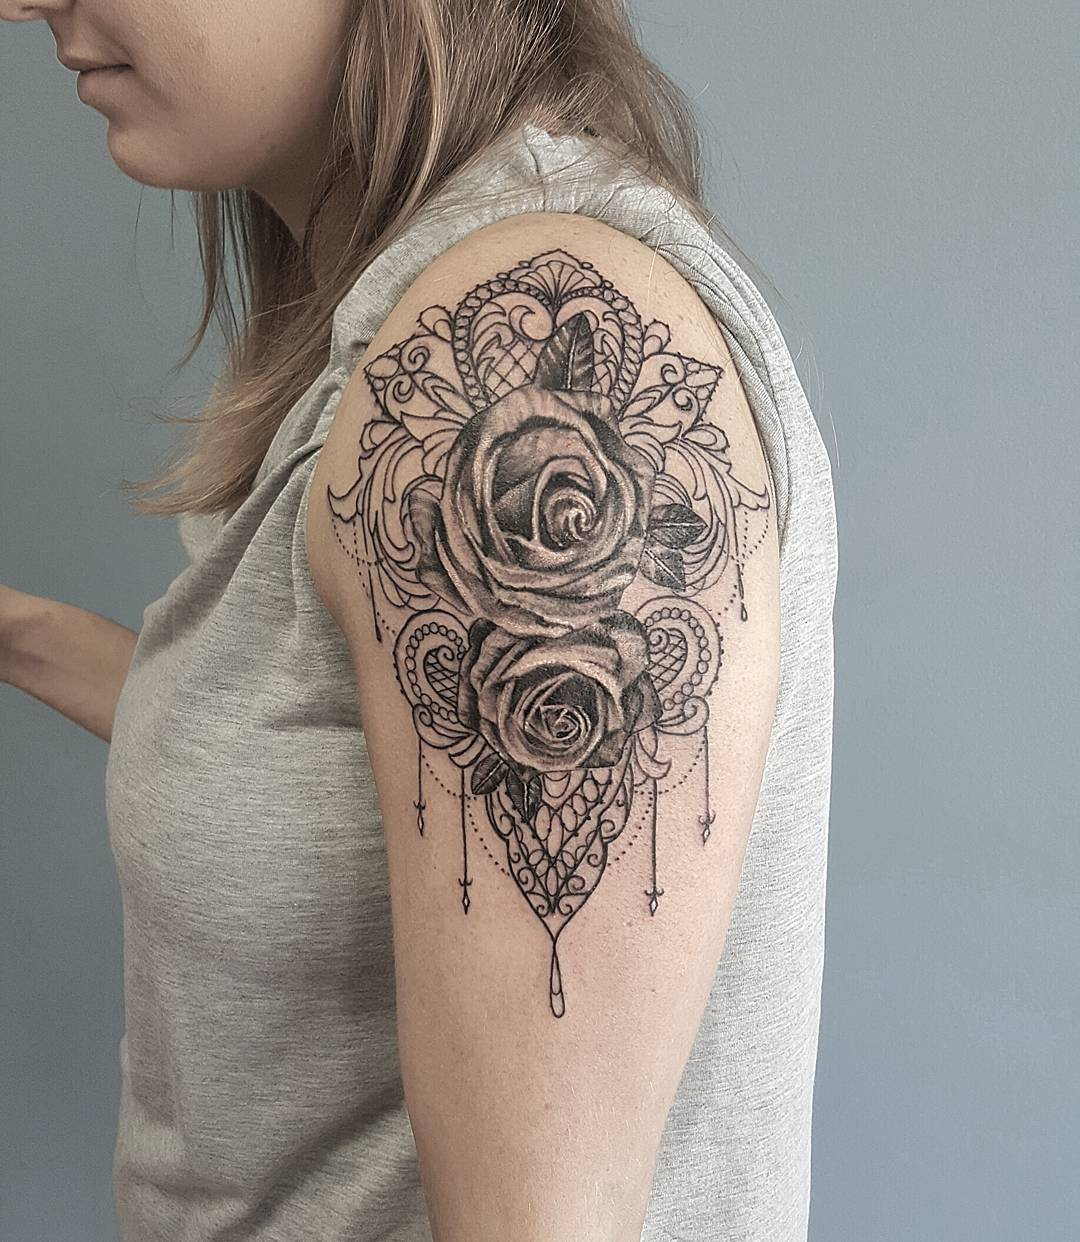 60 Best Lace Tattoo Designs Meanings Sexy And Stunning 2018 in dimensions 1080 X 1242